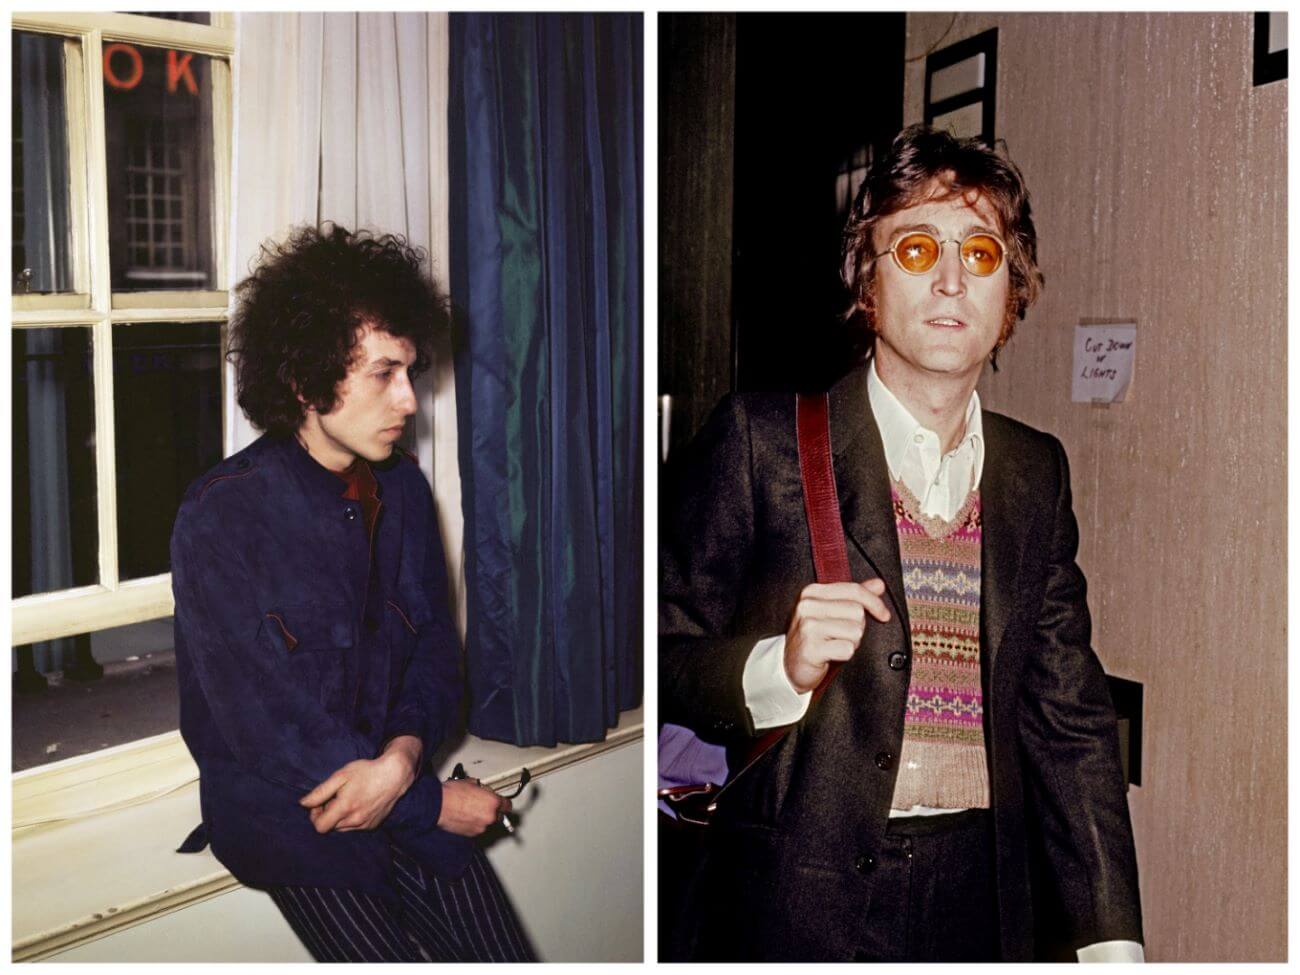 Bob Dylan sits on a windowsill. John Lennon wears sunglasses and carries a bag over his shoulder.